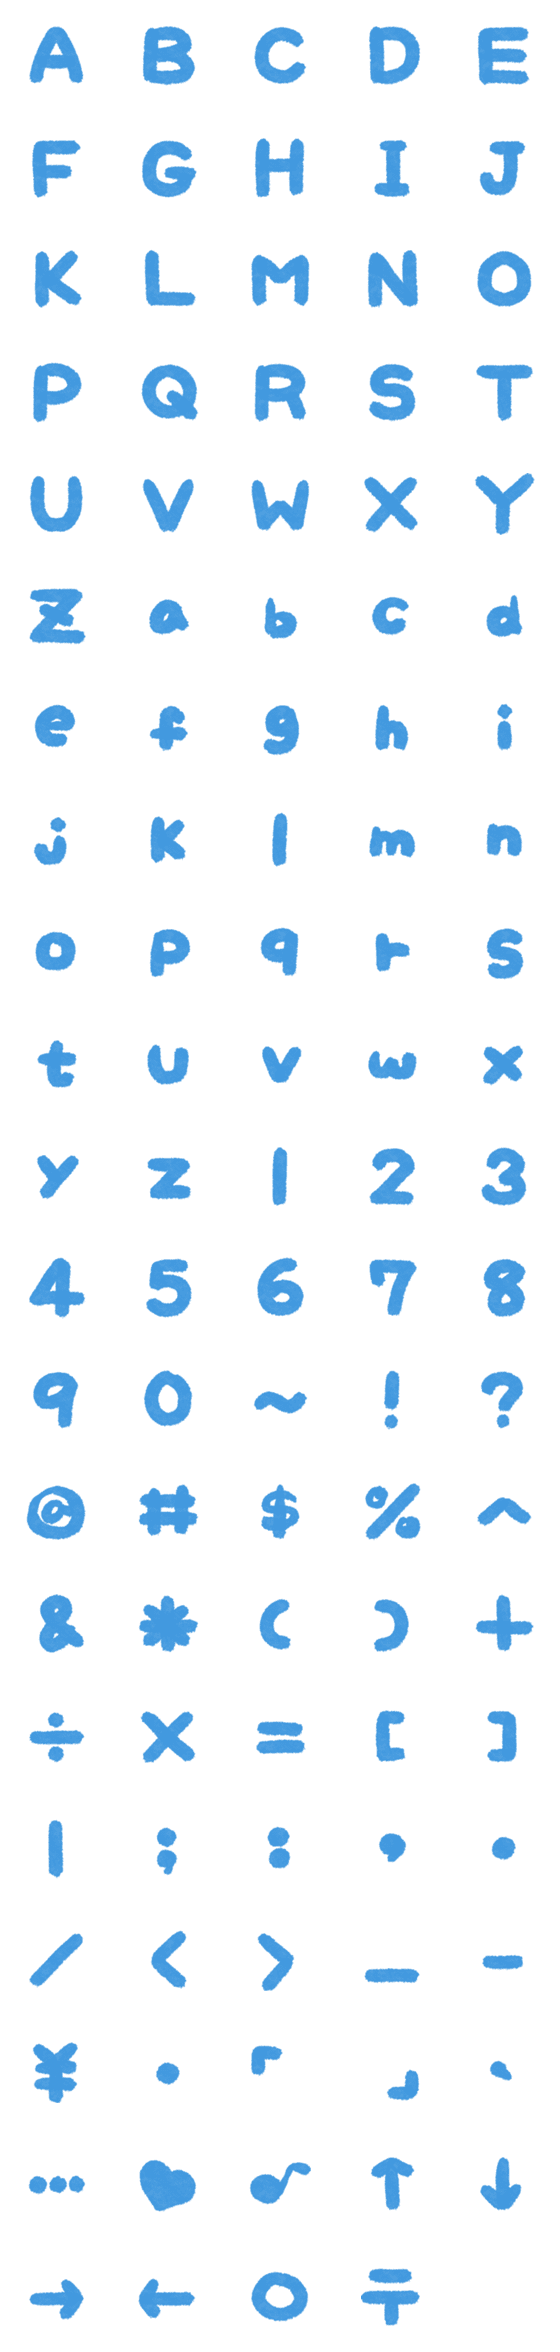 [LINE絵文字]YES WE CYAN Letter number symbols2の画像一覧